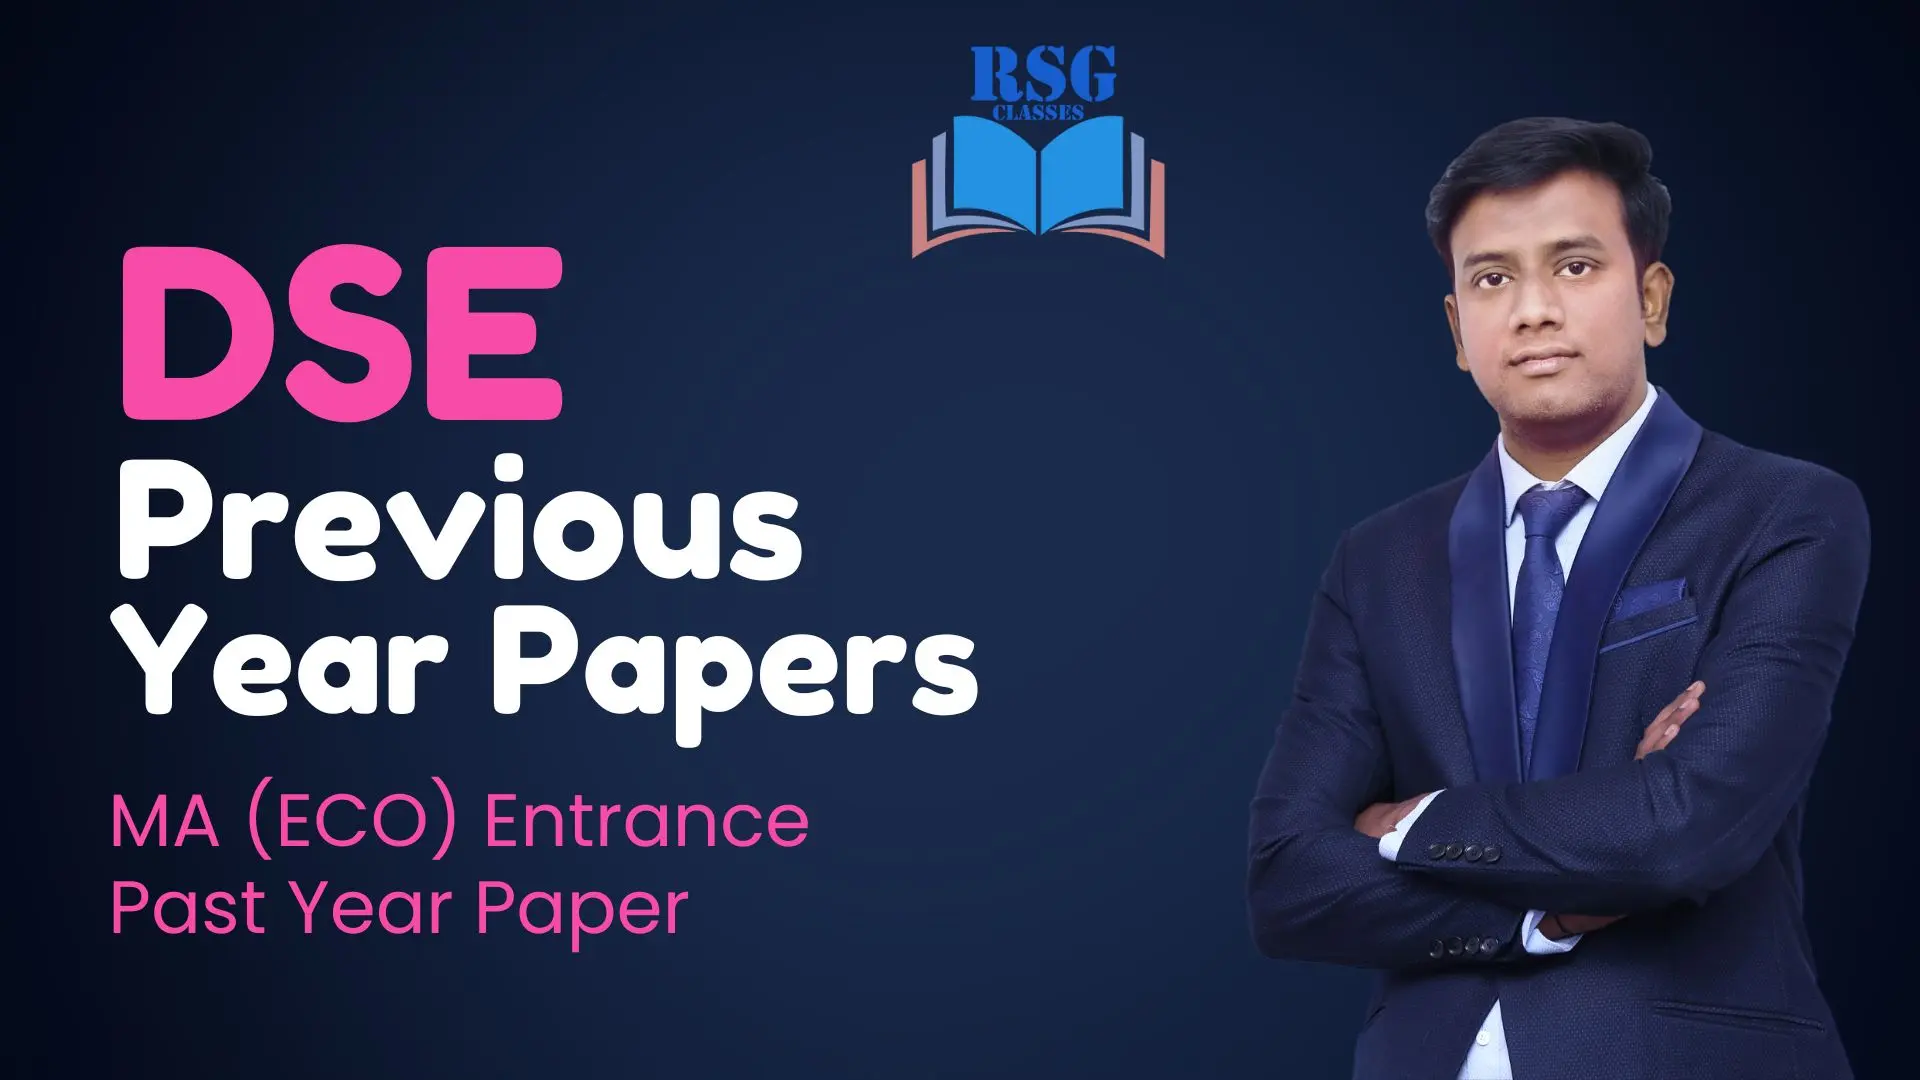 "RSG Classes' DSE Previous Year Papers: Ace the DSE exams with comprehensive practice."